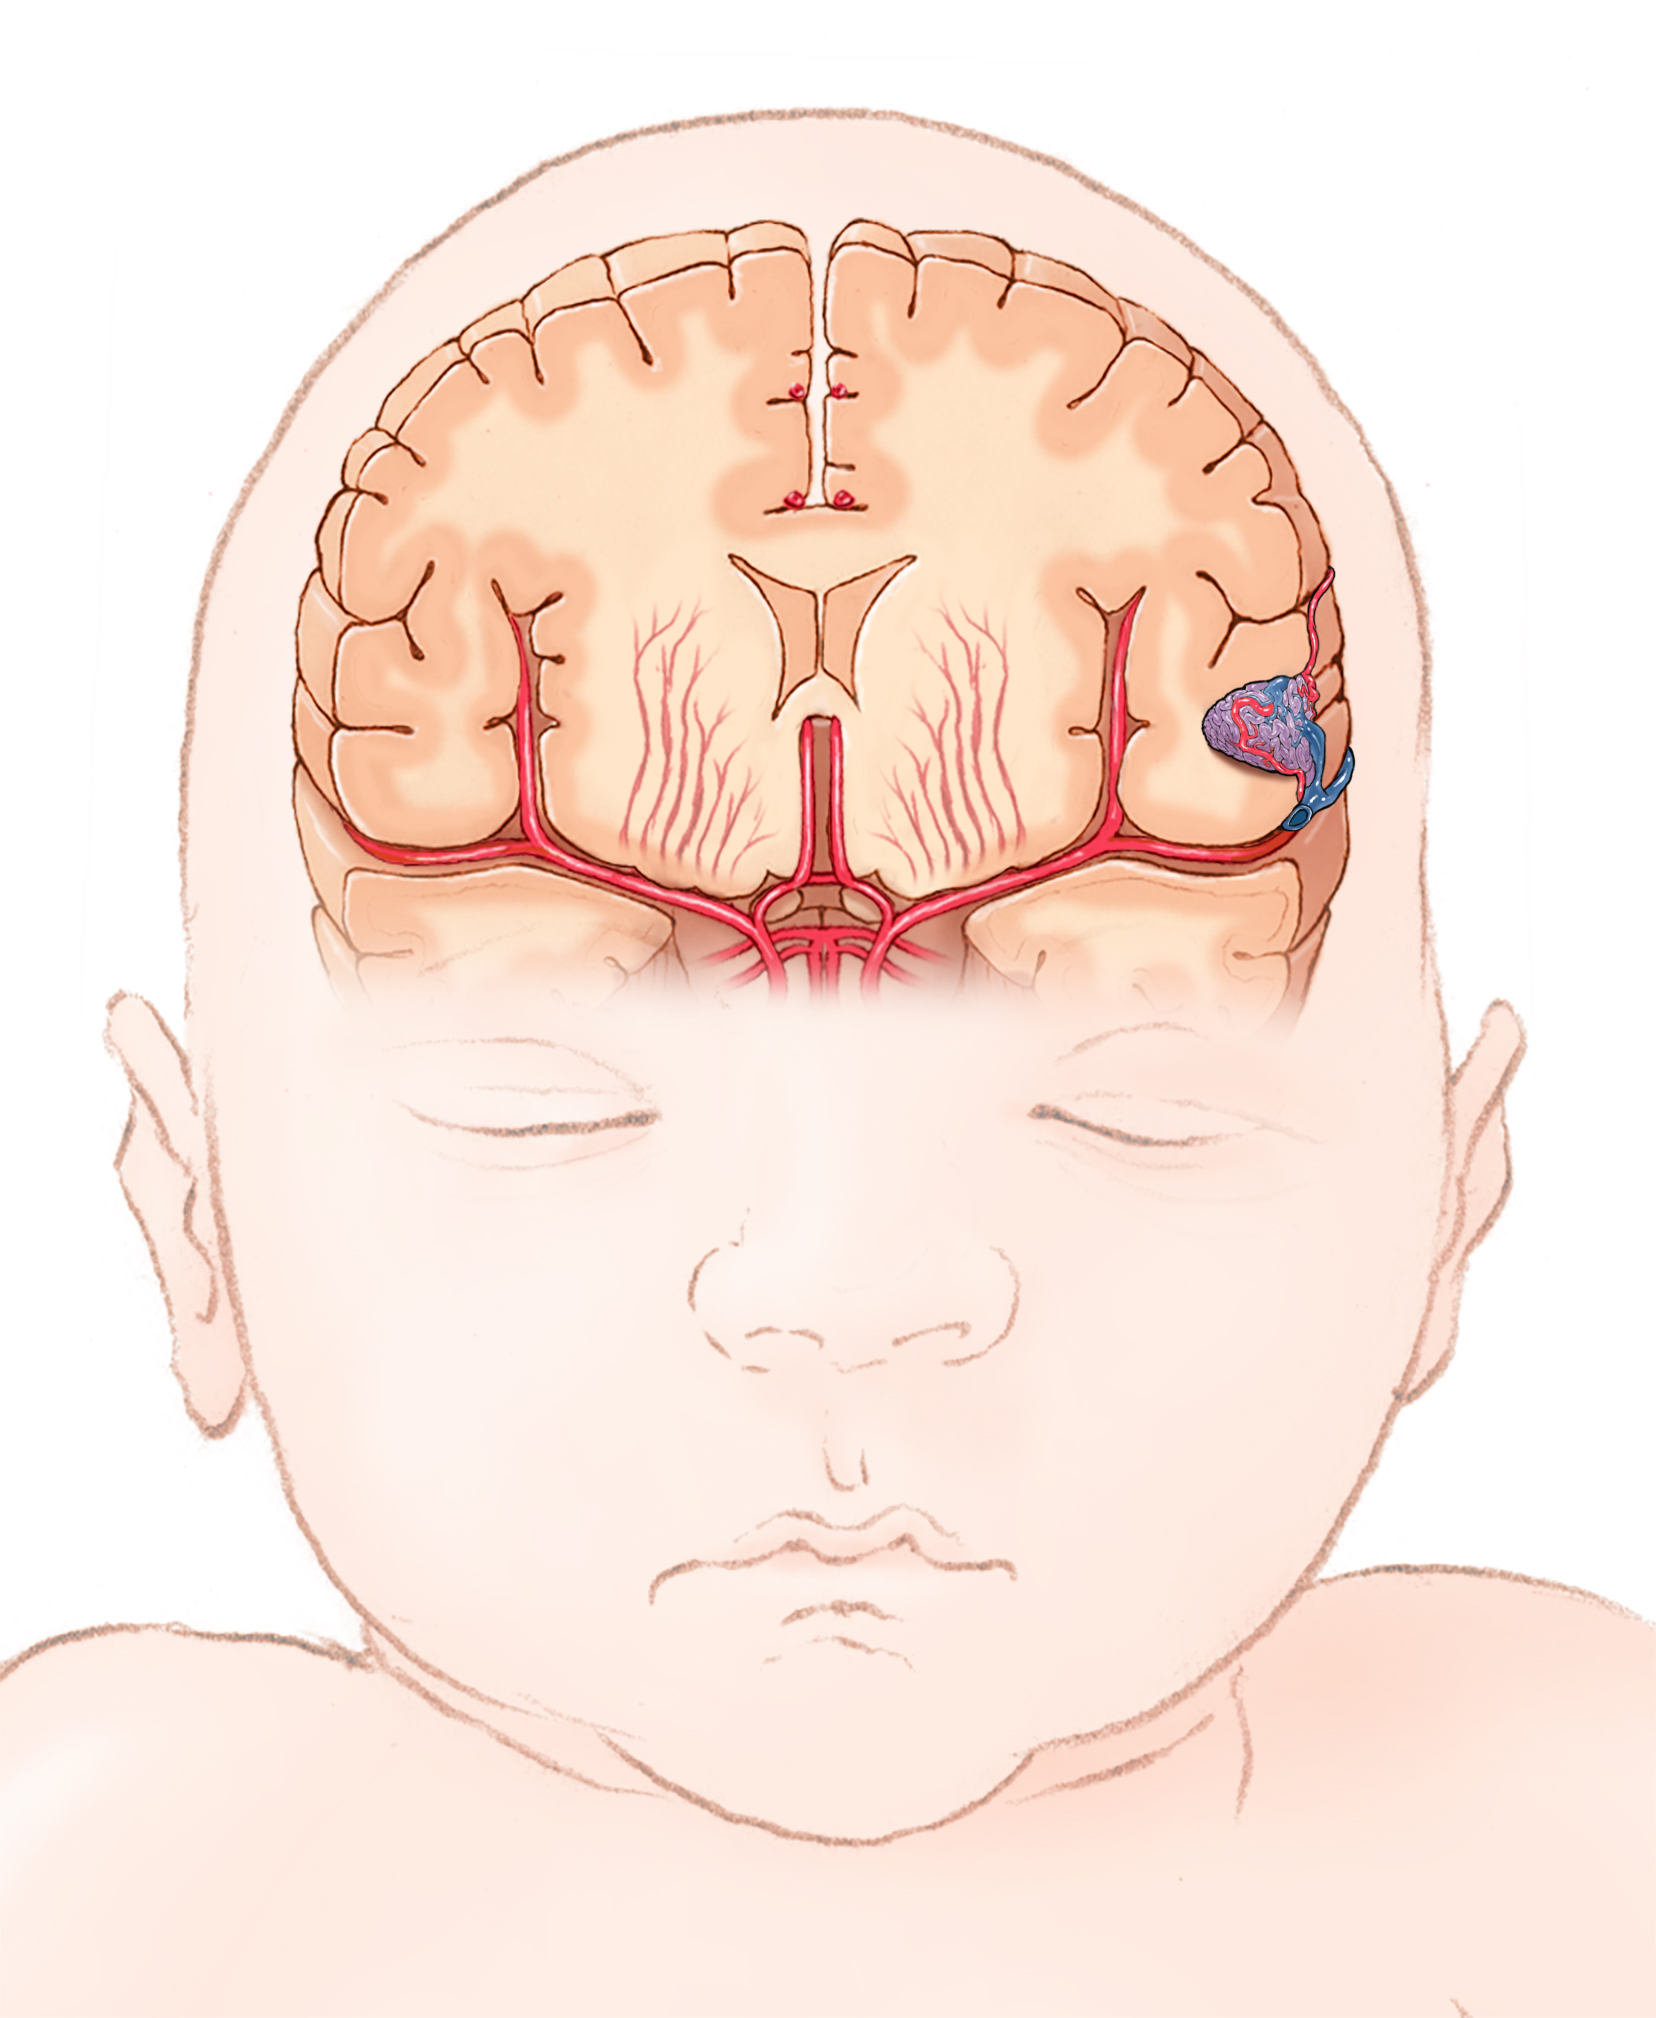 Illustration a child's brain with an AVM